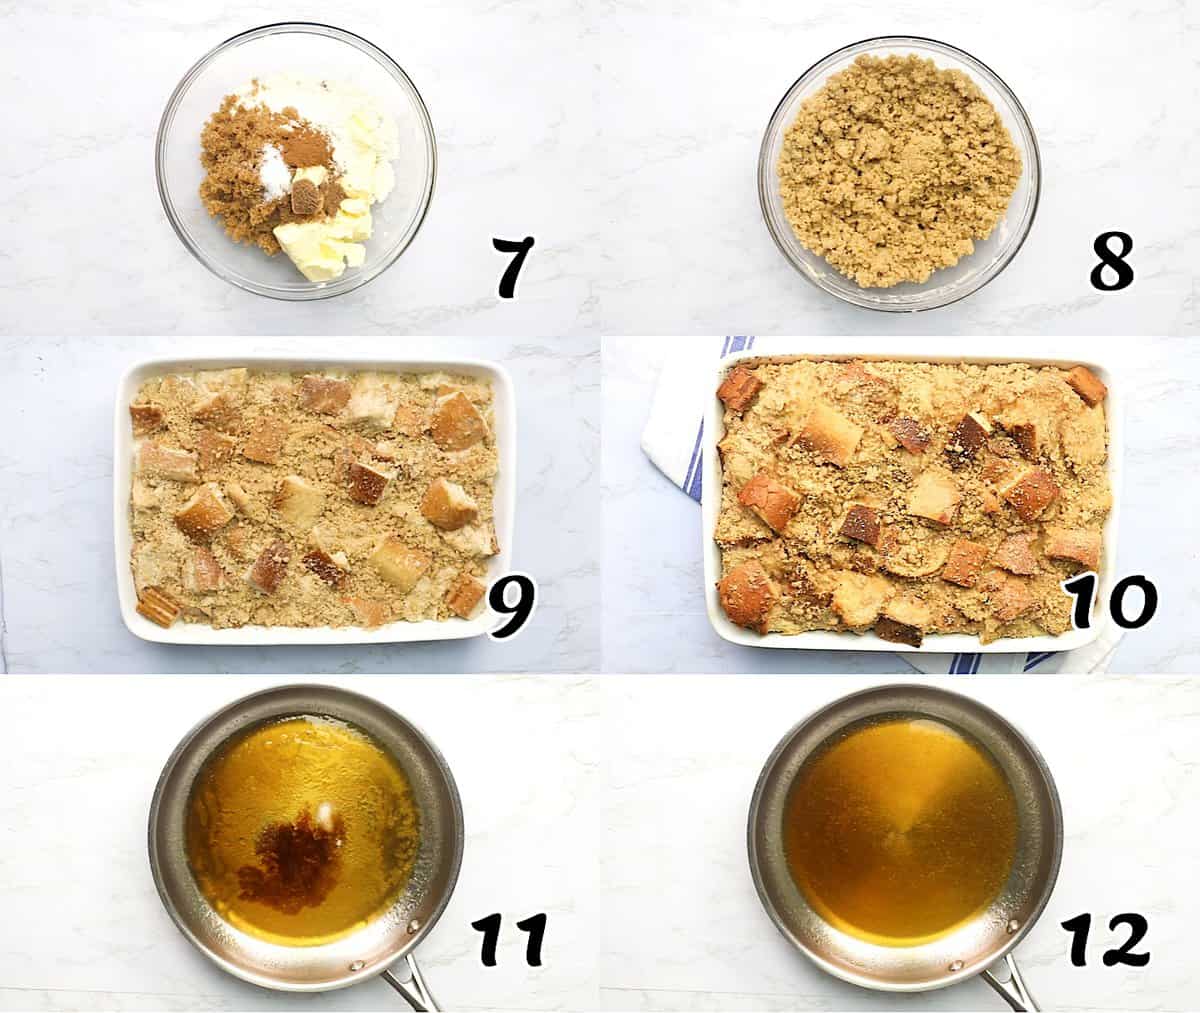 Make a breadcrumb topping and bake to make syrup